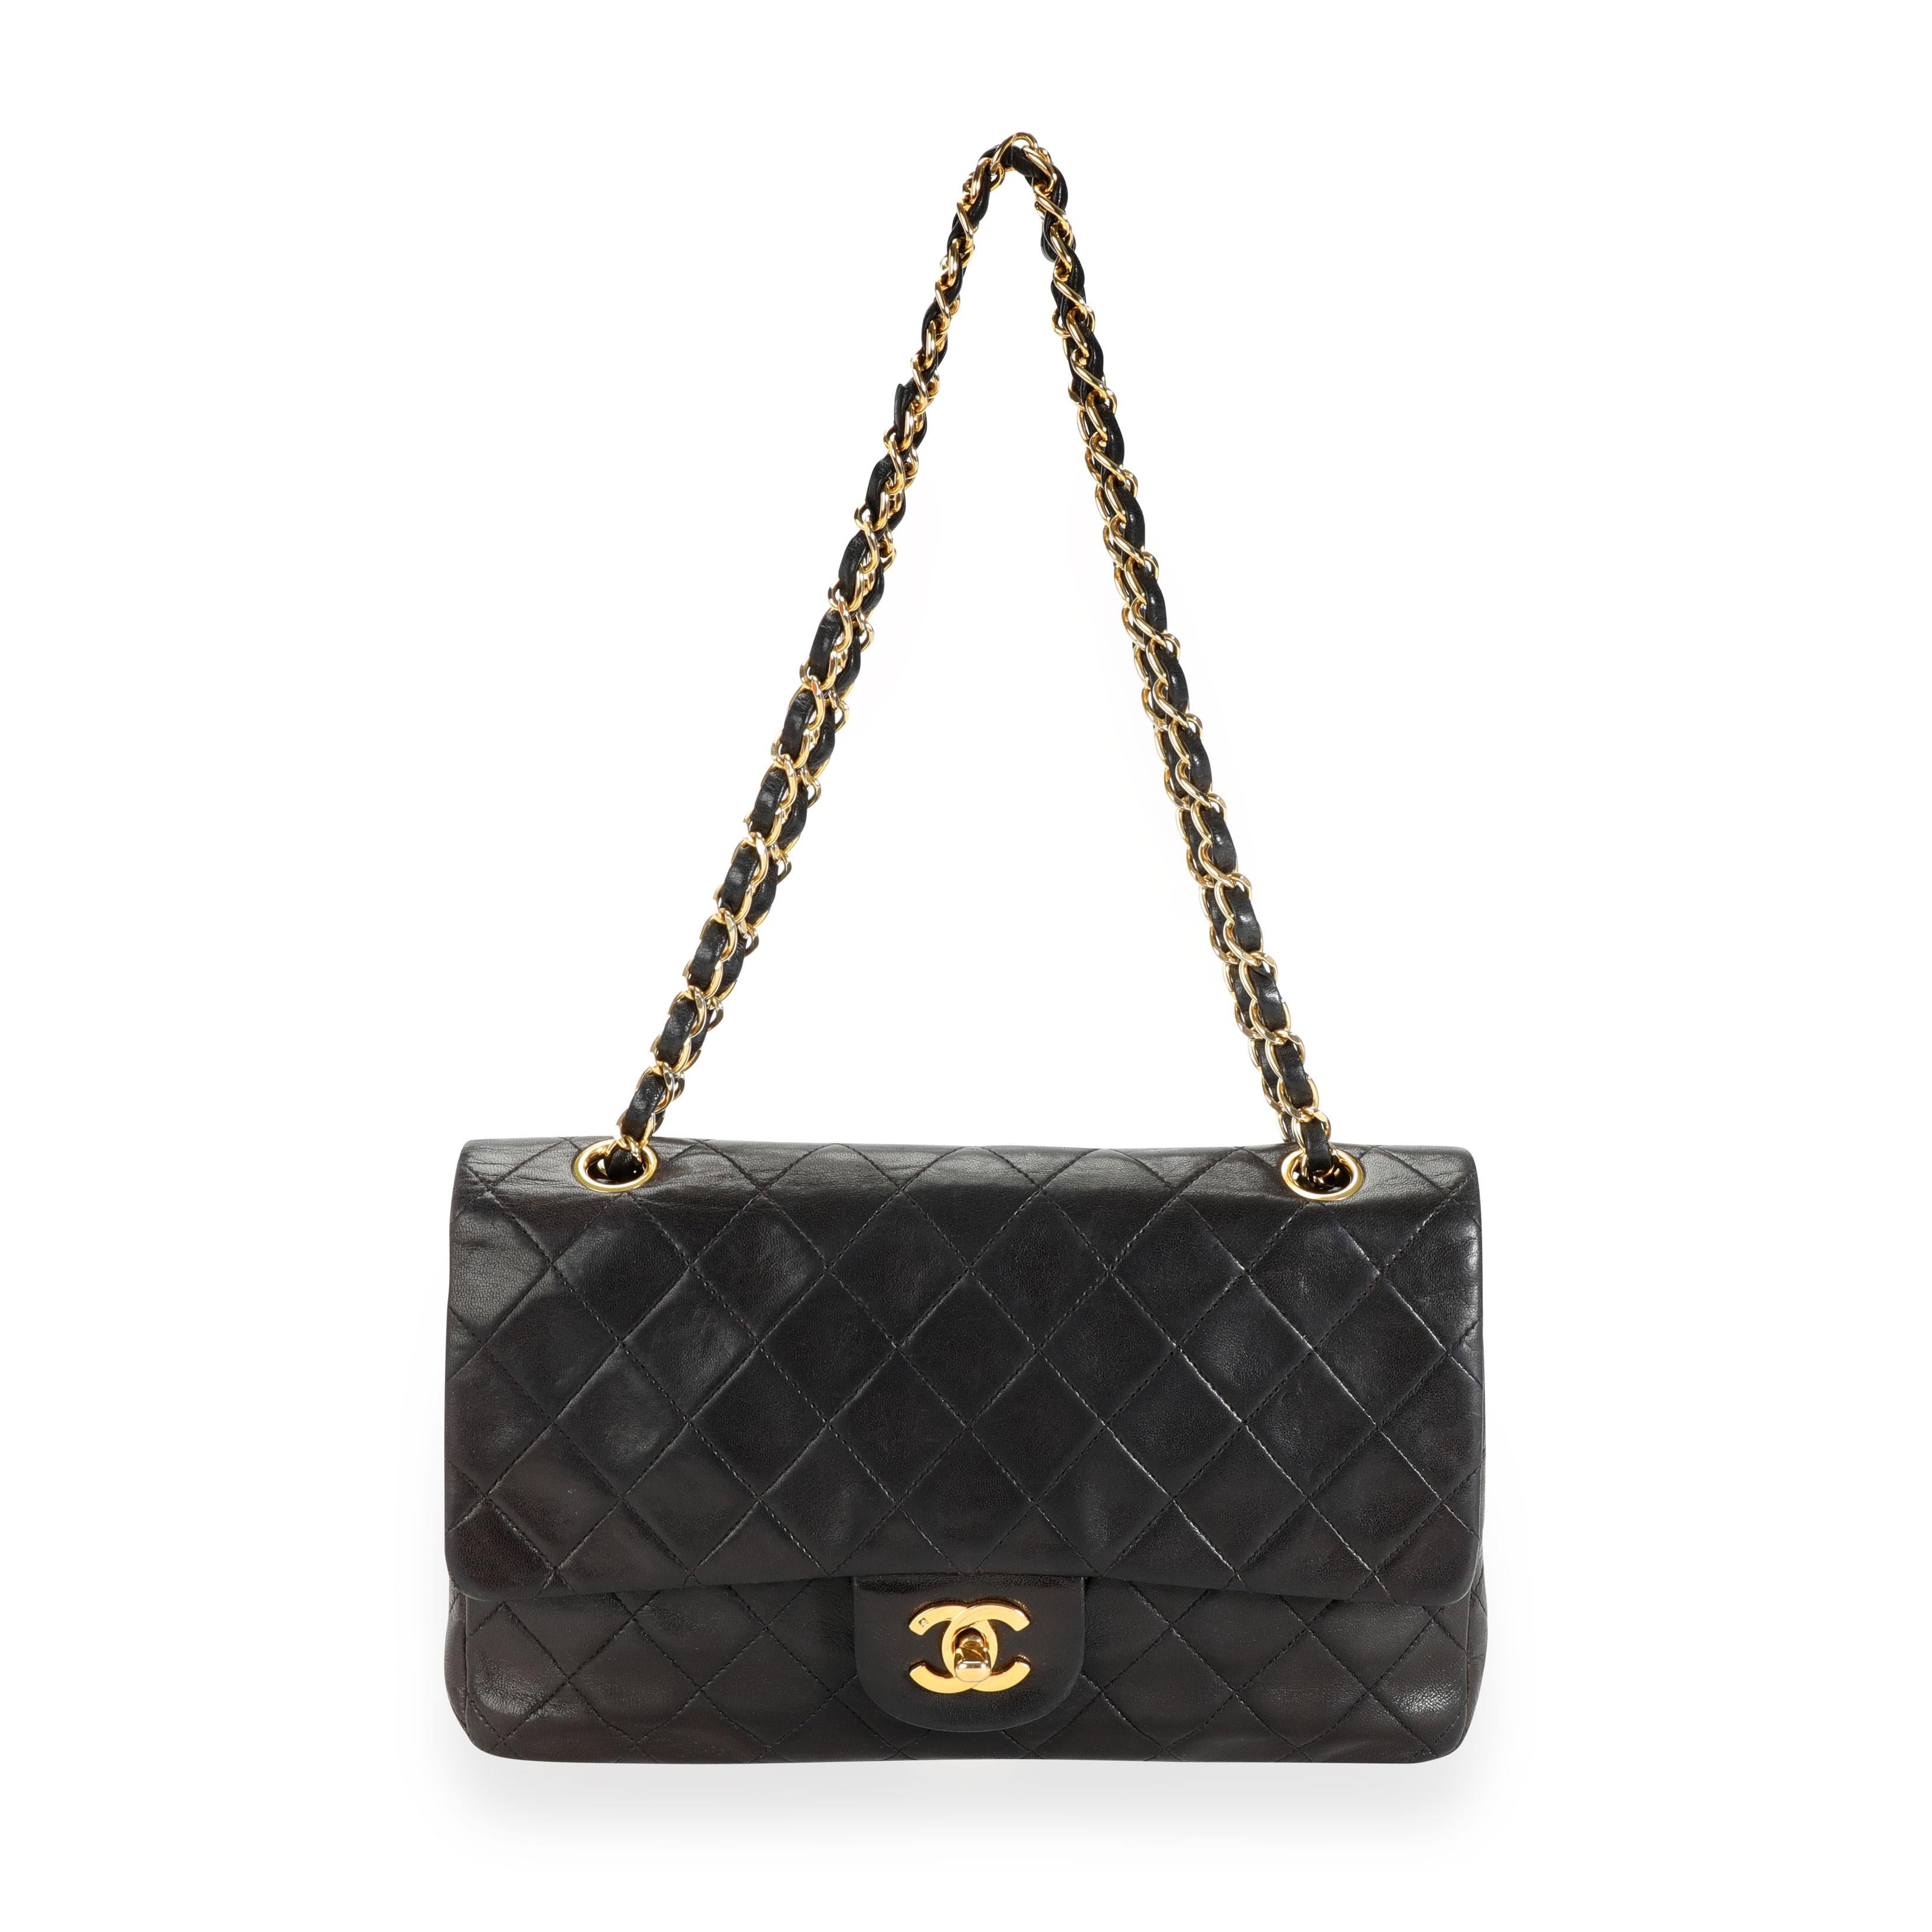 Chanel Vintage Black Quilted Lambskin Medium Classic Double Flap Bag
SKU: 111044

MSRP: USD 6,800.00
Handbag Condition: Good
Condition Comments: Good Condition. Scuffing to corners. Discoloration throughout leather. Scratching to hardware. Scuffing